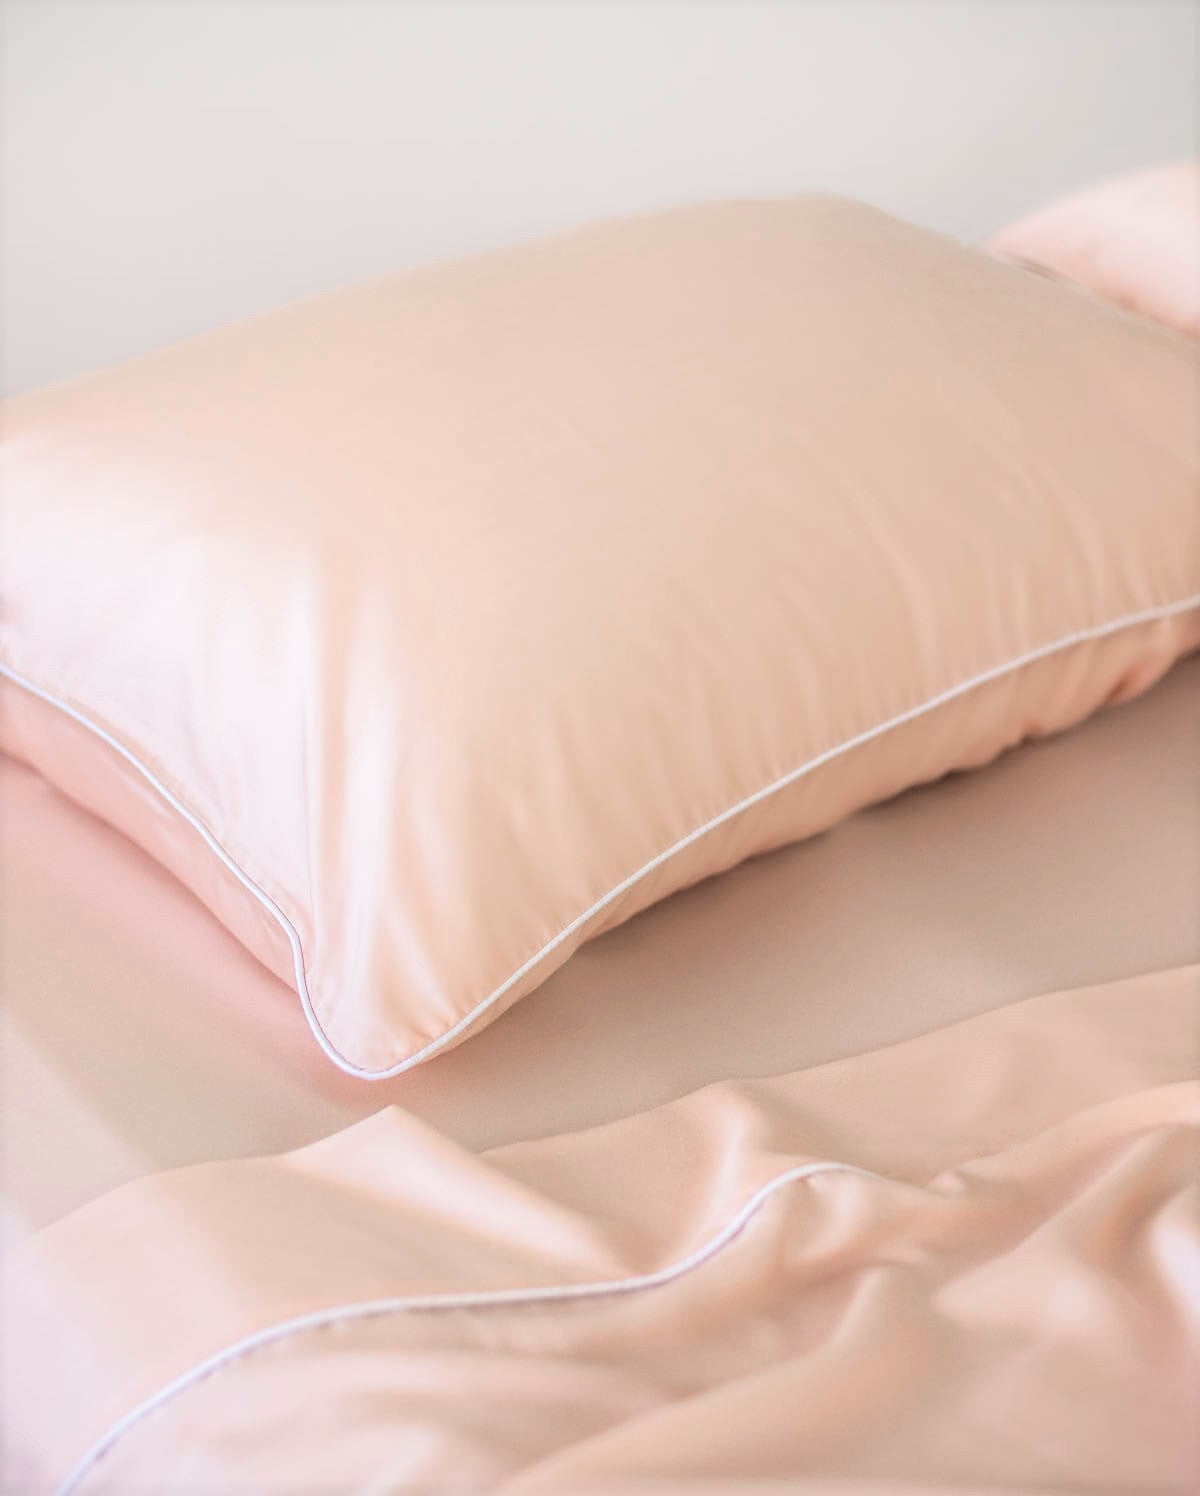 ava and ava ph organic bamboo lyocell 4pc sheet set (fitted sheet, flat sheet, pillowcases) pastel blush pink with white contrast piping at the top hem